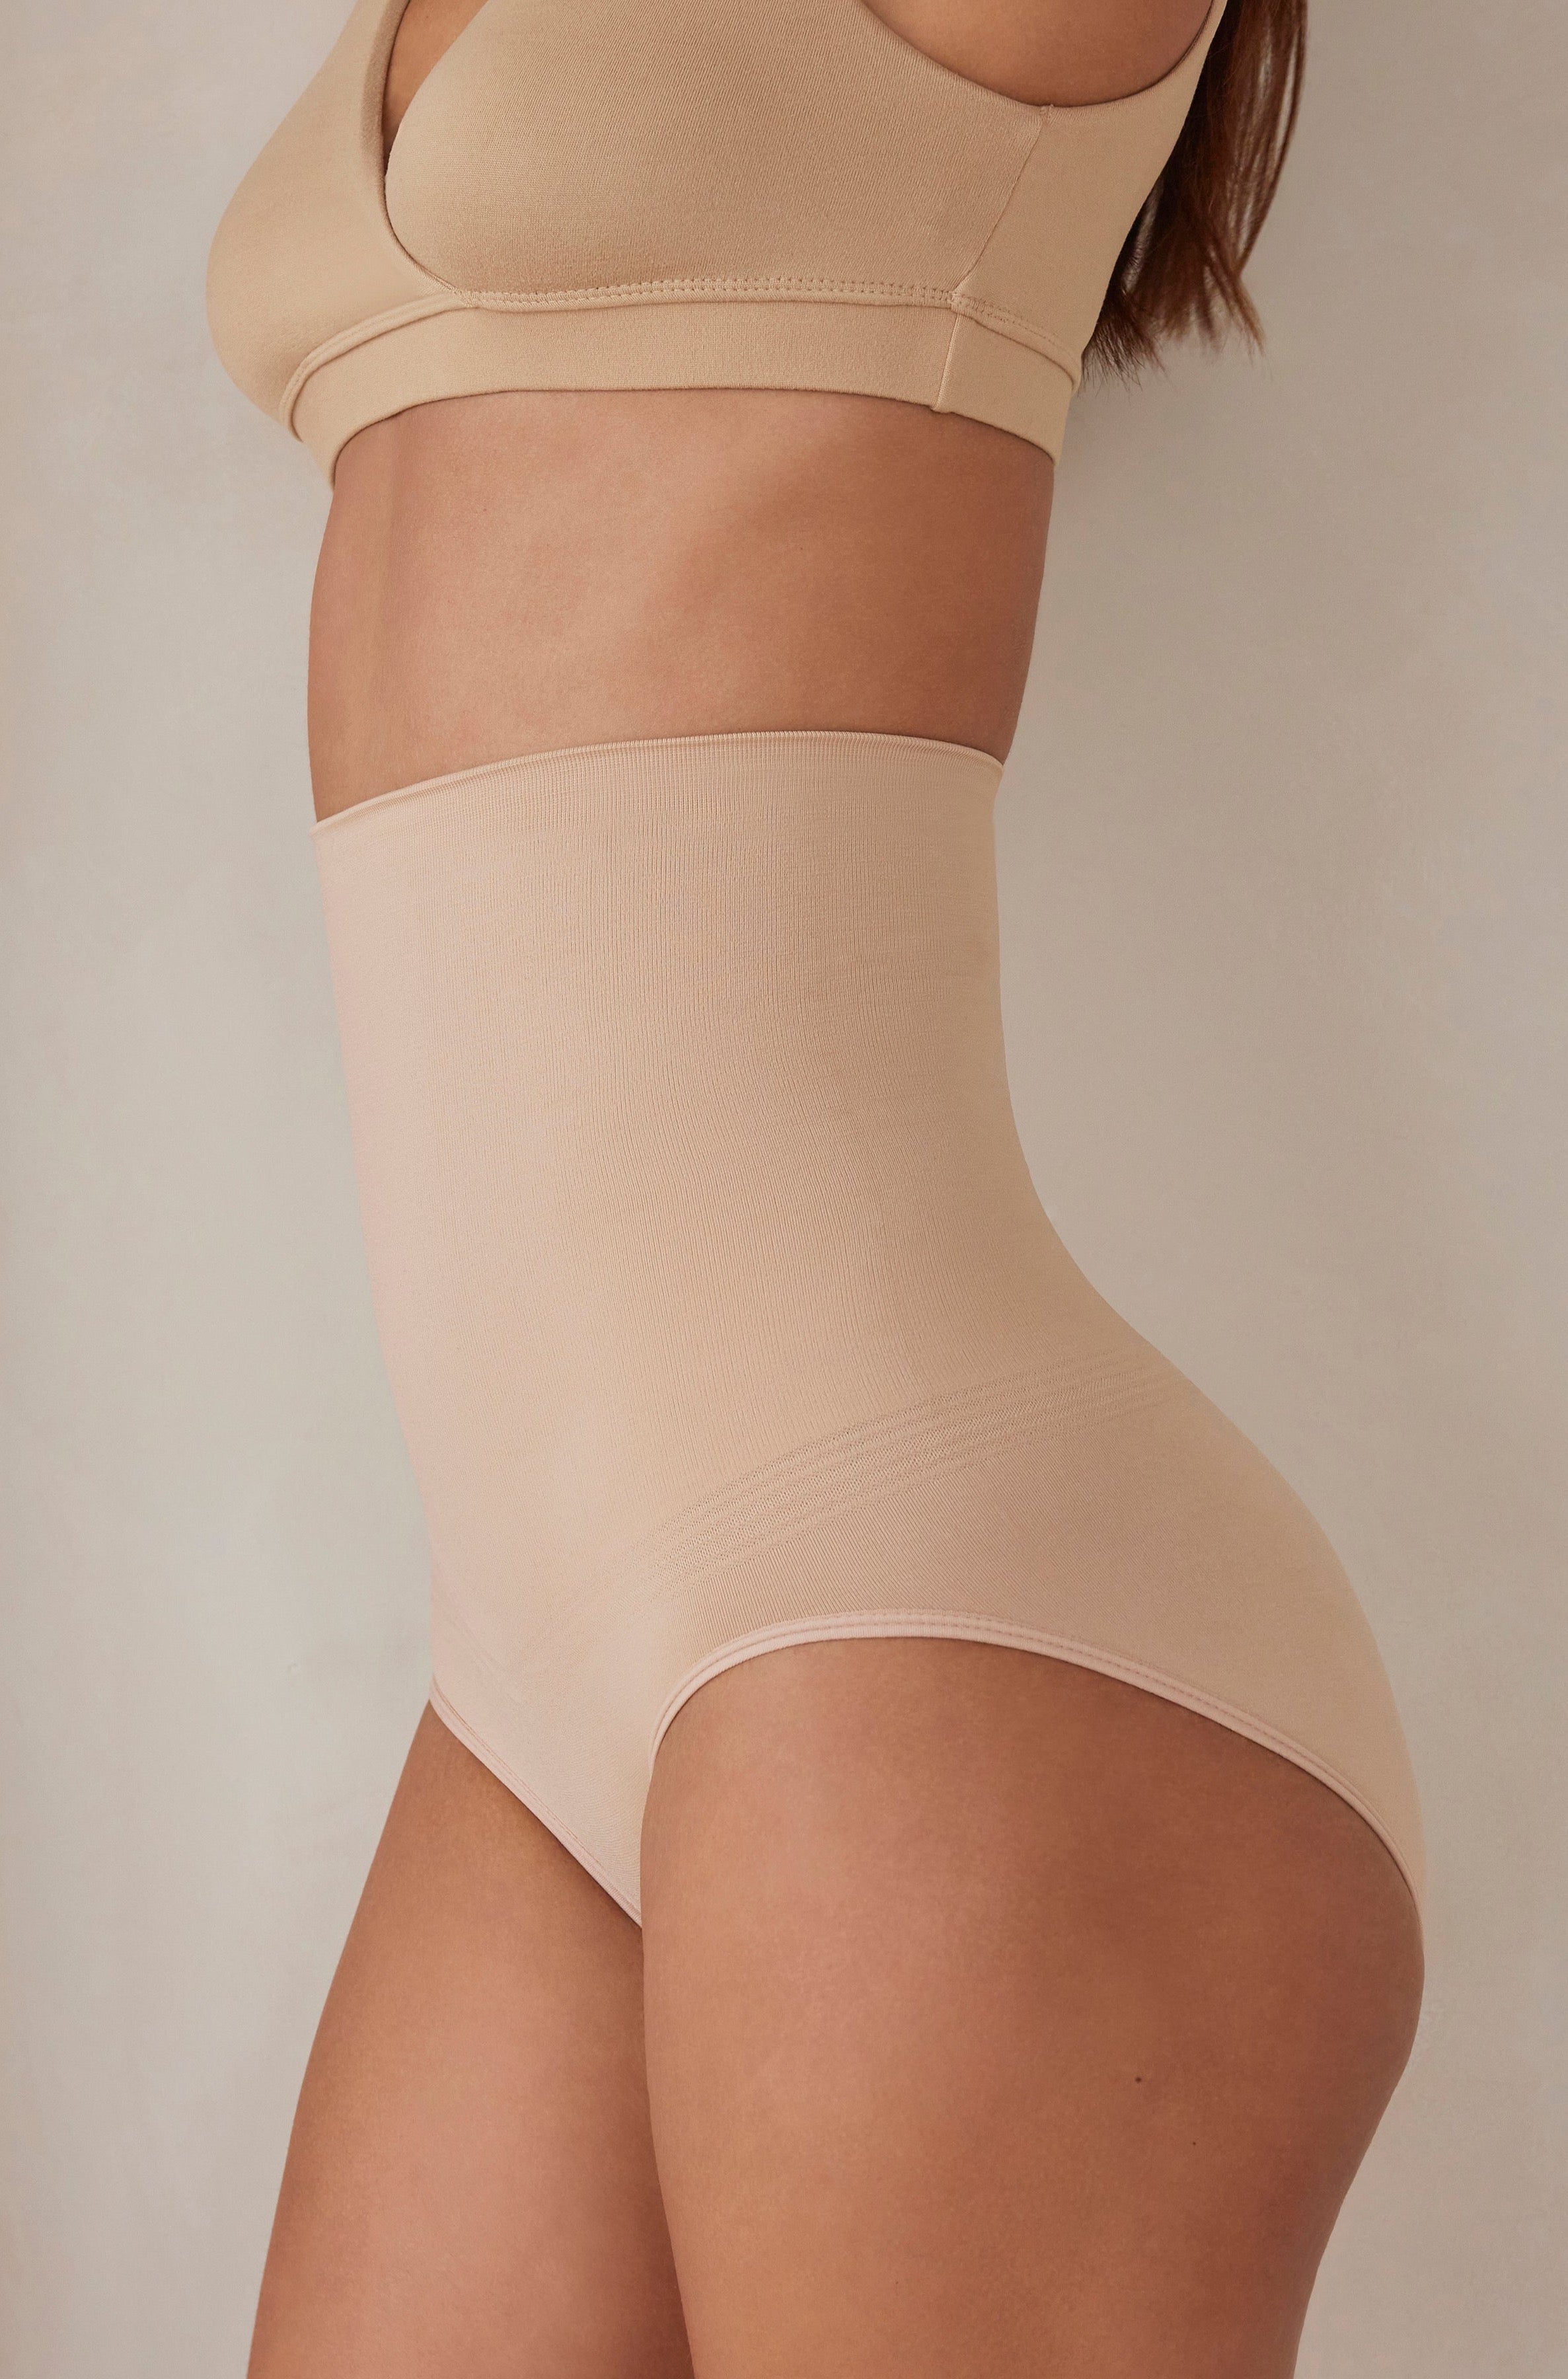 The Support Bodysuit